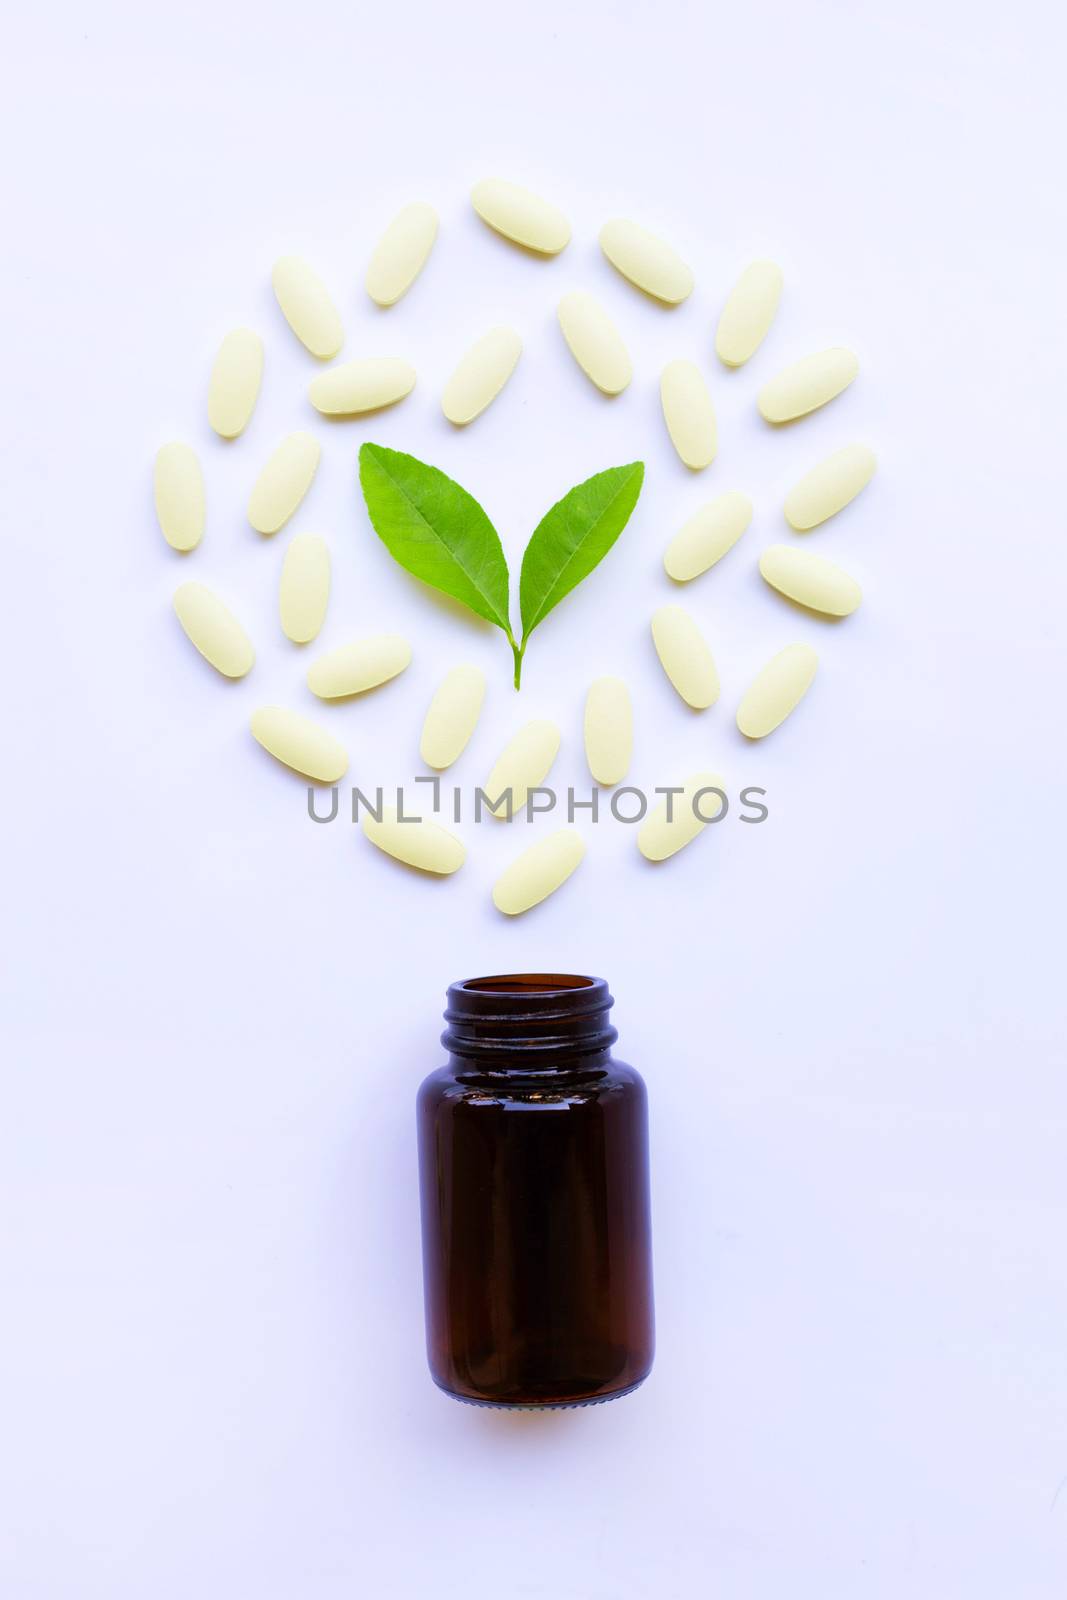 Vitamin C bottle and pills with green leavs on white background.